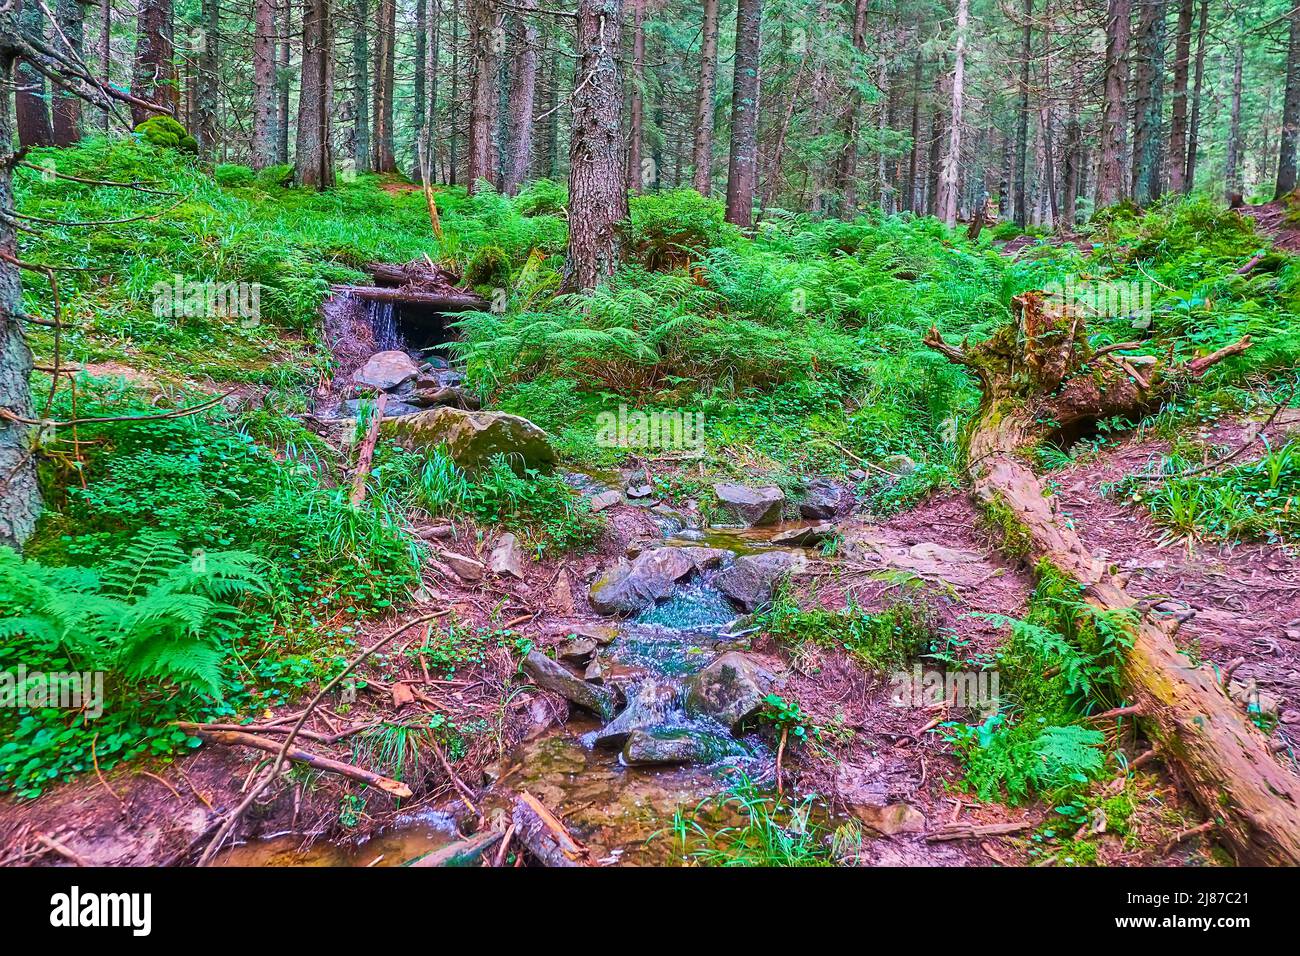 The colorful conifer forest with red soil and narrow creek, running to the Prut River, beginning at the Mount Hoverla, Ukraine Stock Photo